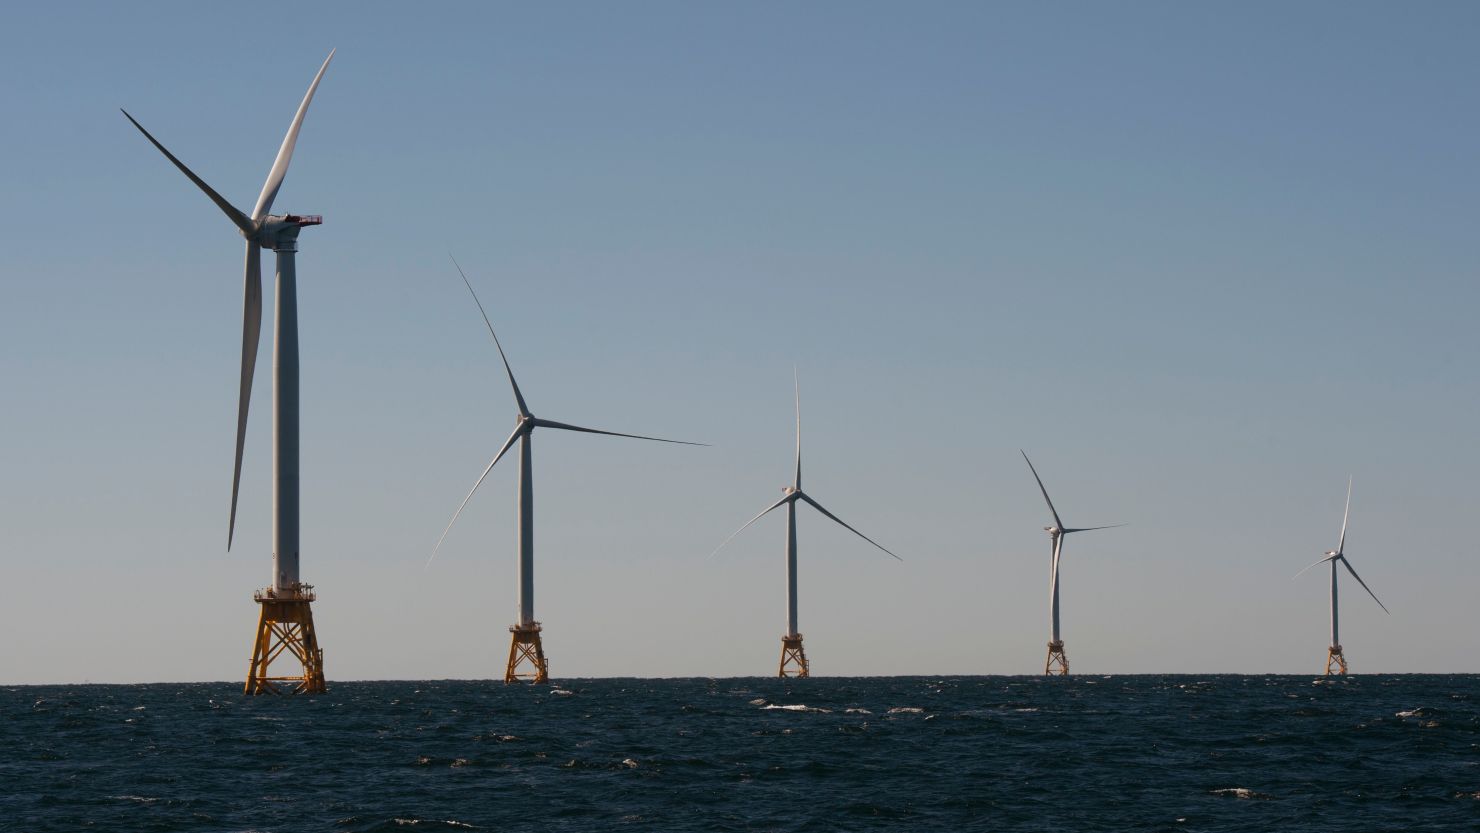 Wind turbines, of the Block Island Wind Farm, tower over the water on October 14, 2016 off the shores of Block Island, Rhode Island.
The first offshore wind project in America generated enough electricity for the entire island. (DON EMMERT/AFP/Getty Images)